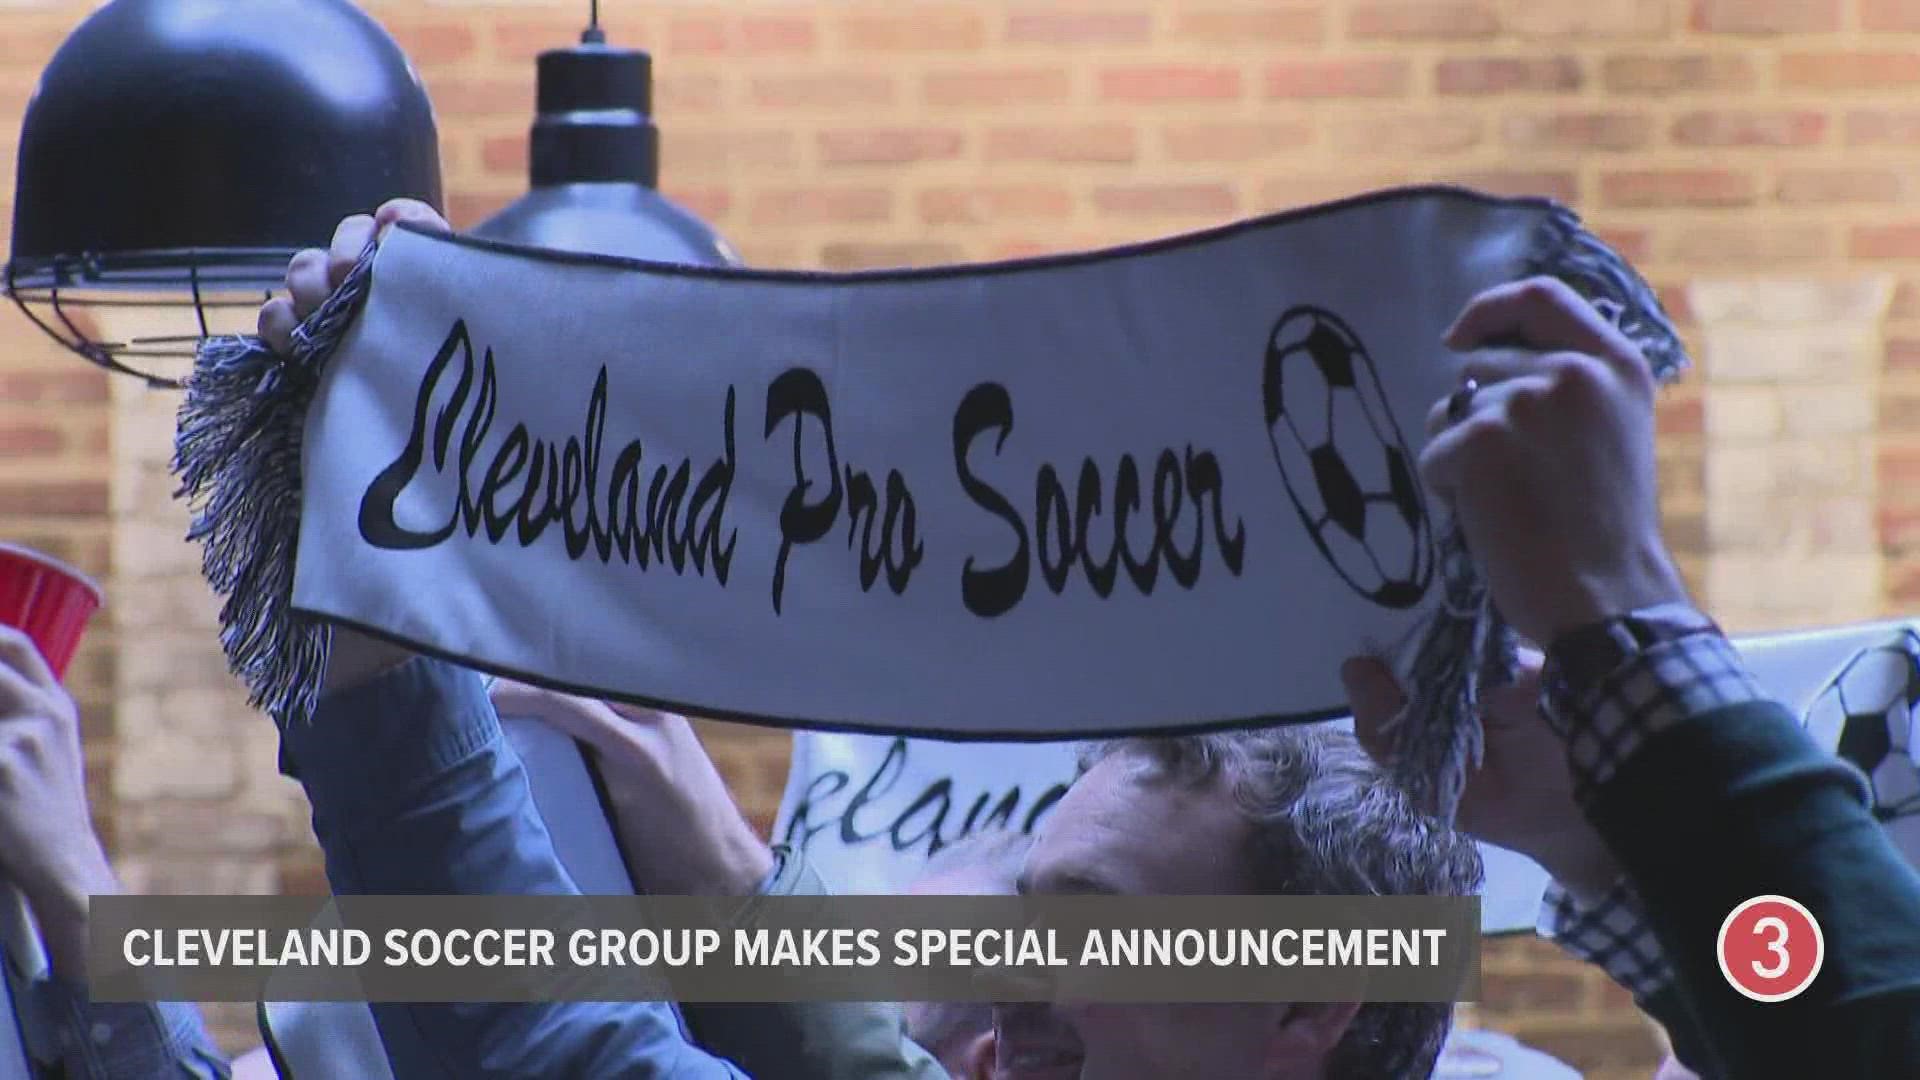 The announcement was made ahead of the U.S. Men's National Team's World Cup opener vs. Wales.